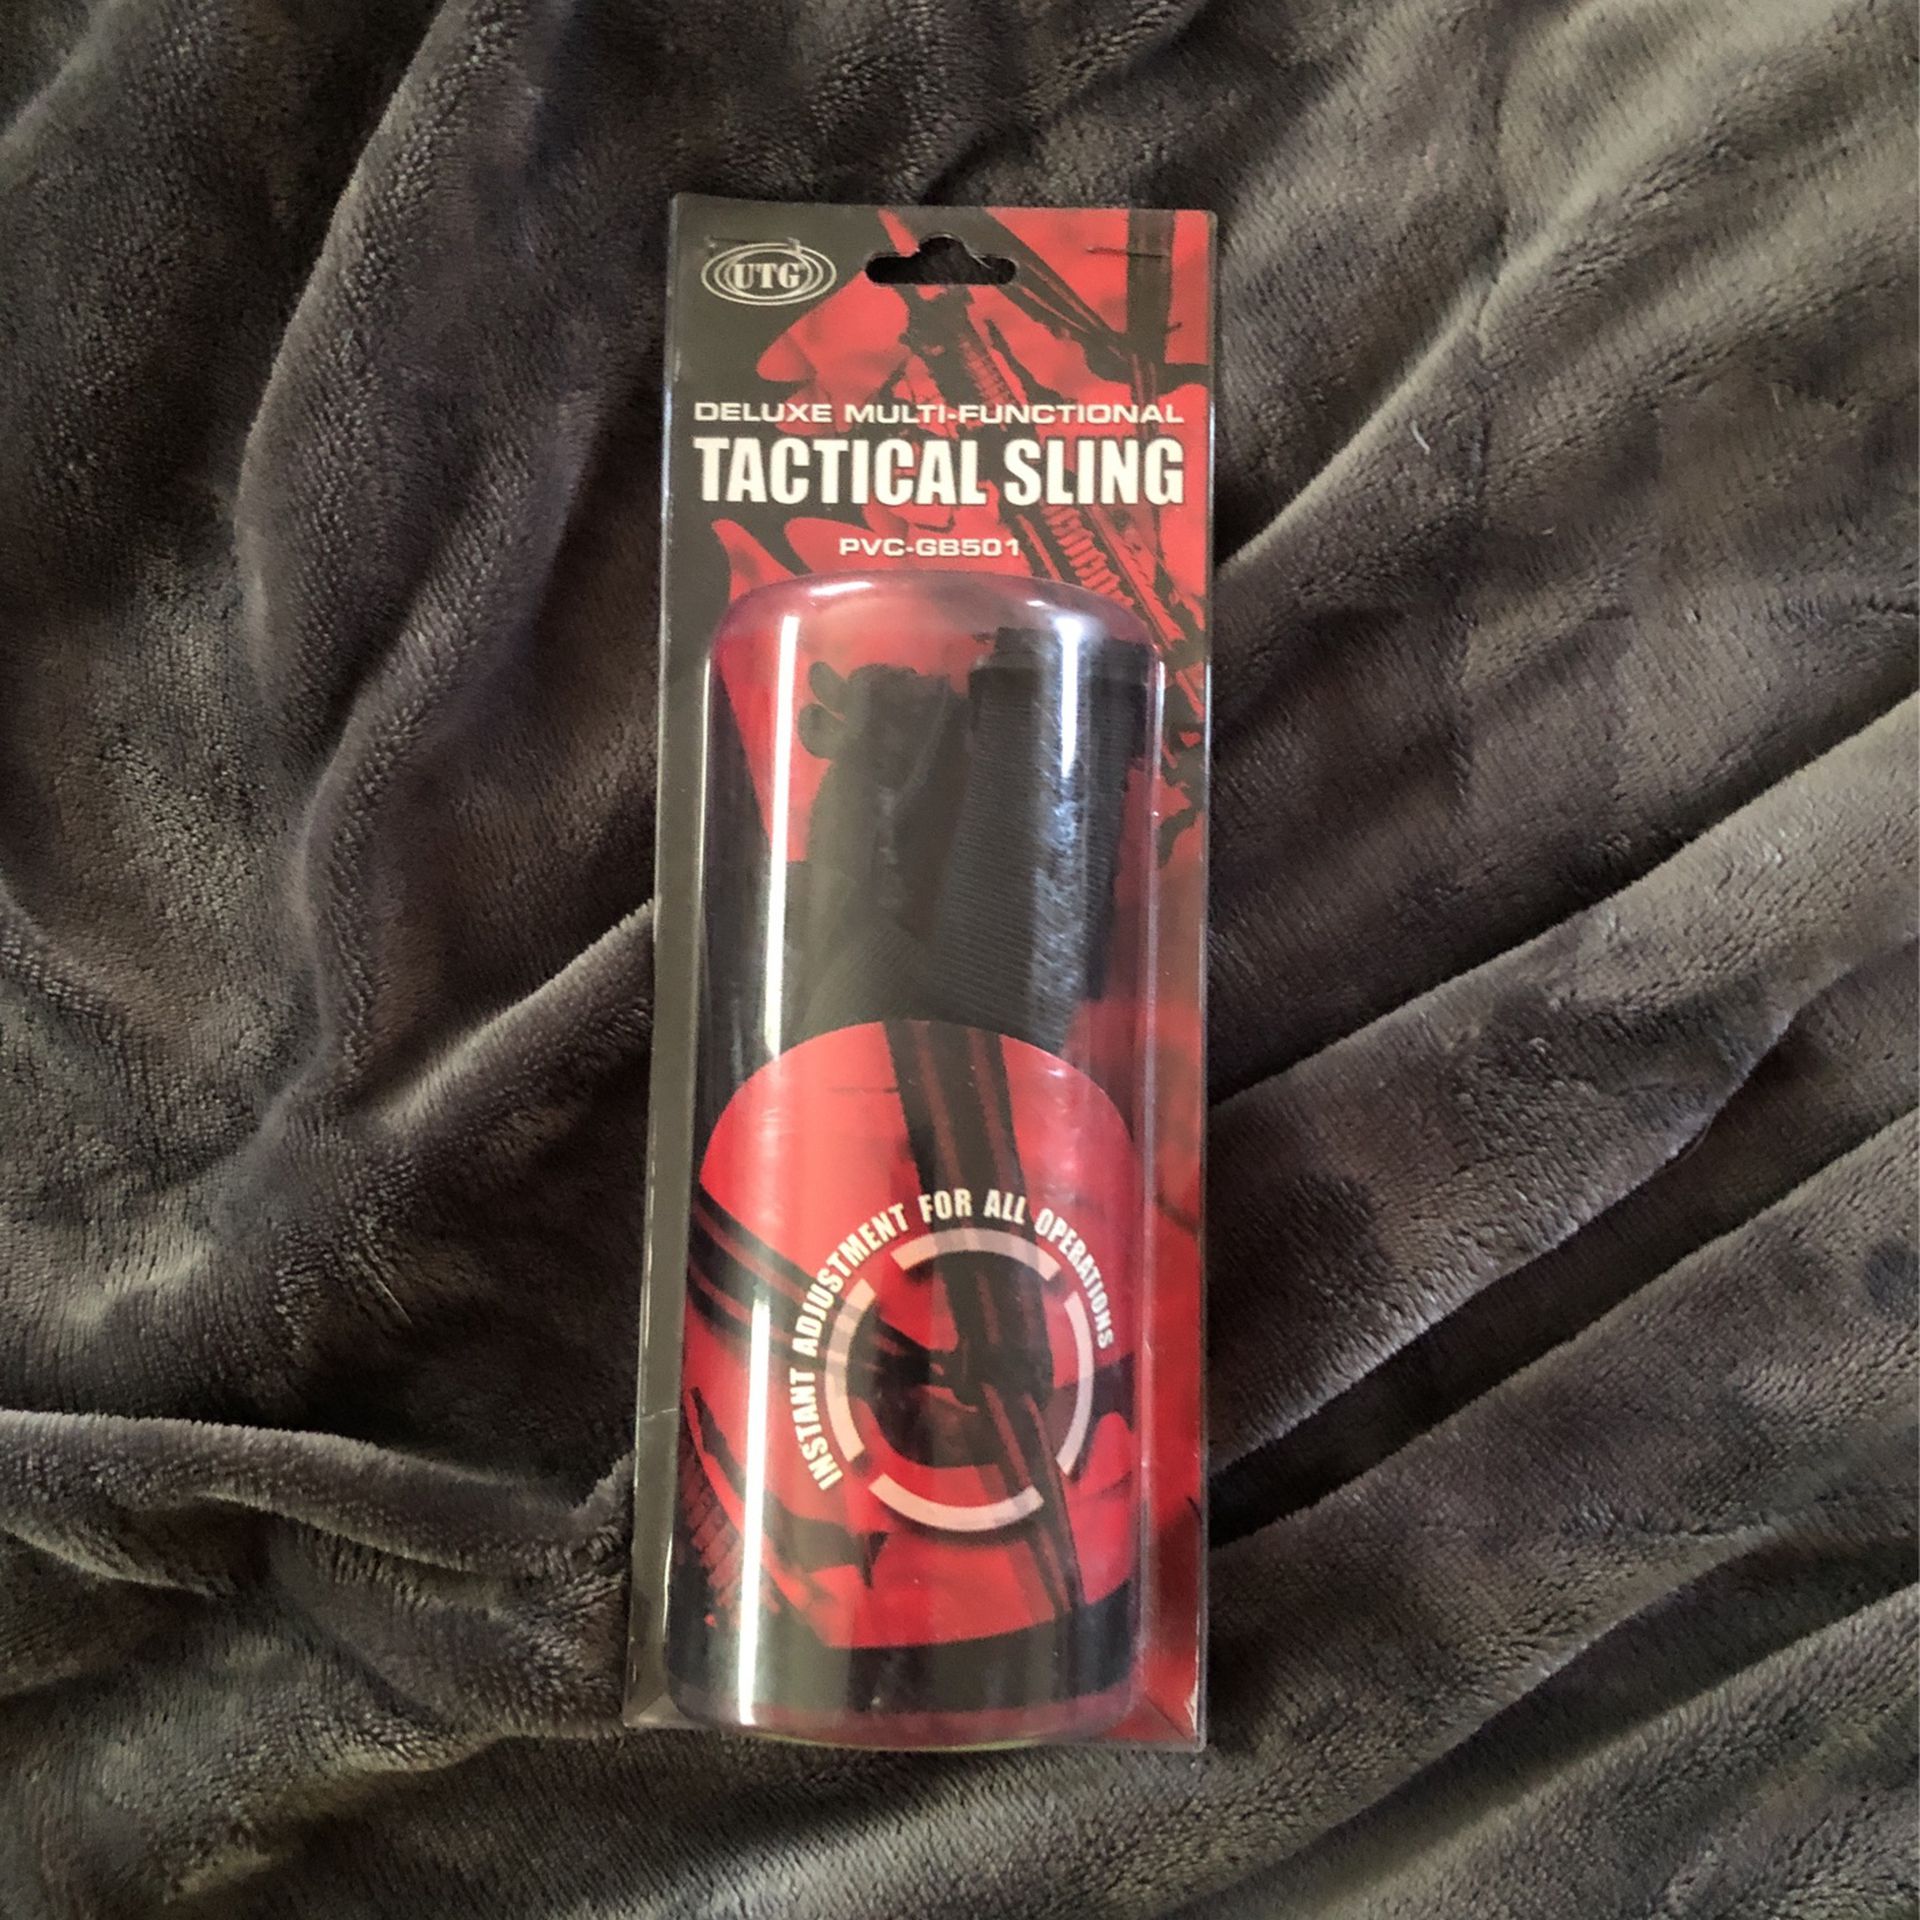 UTG TACTICAL SLING *NEW IN BOX